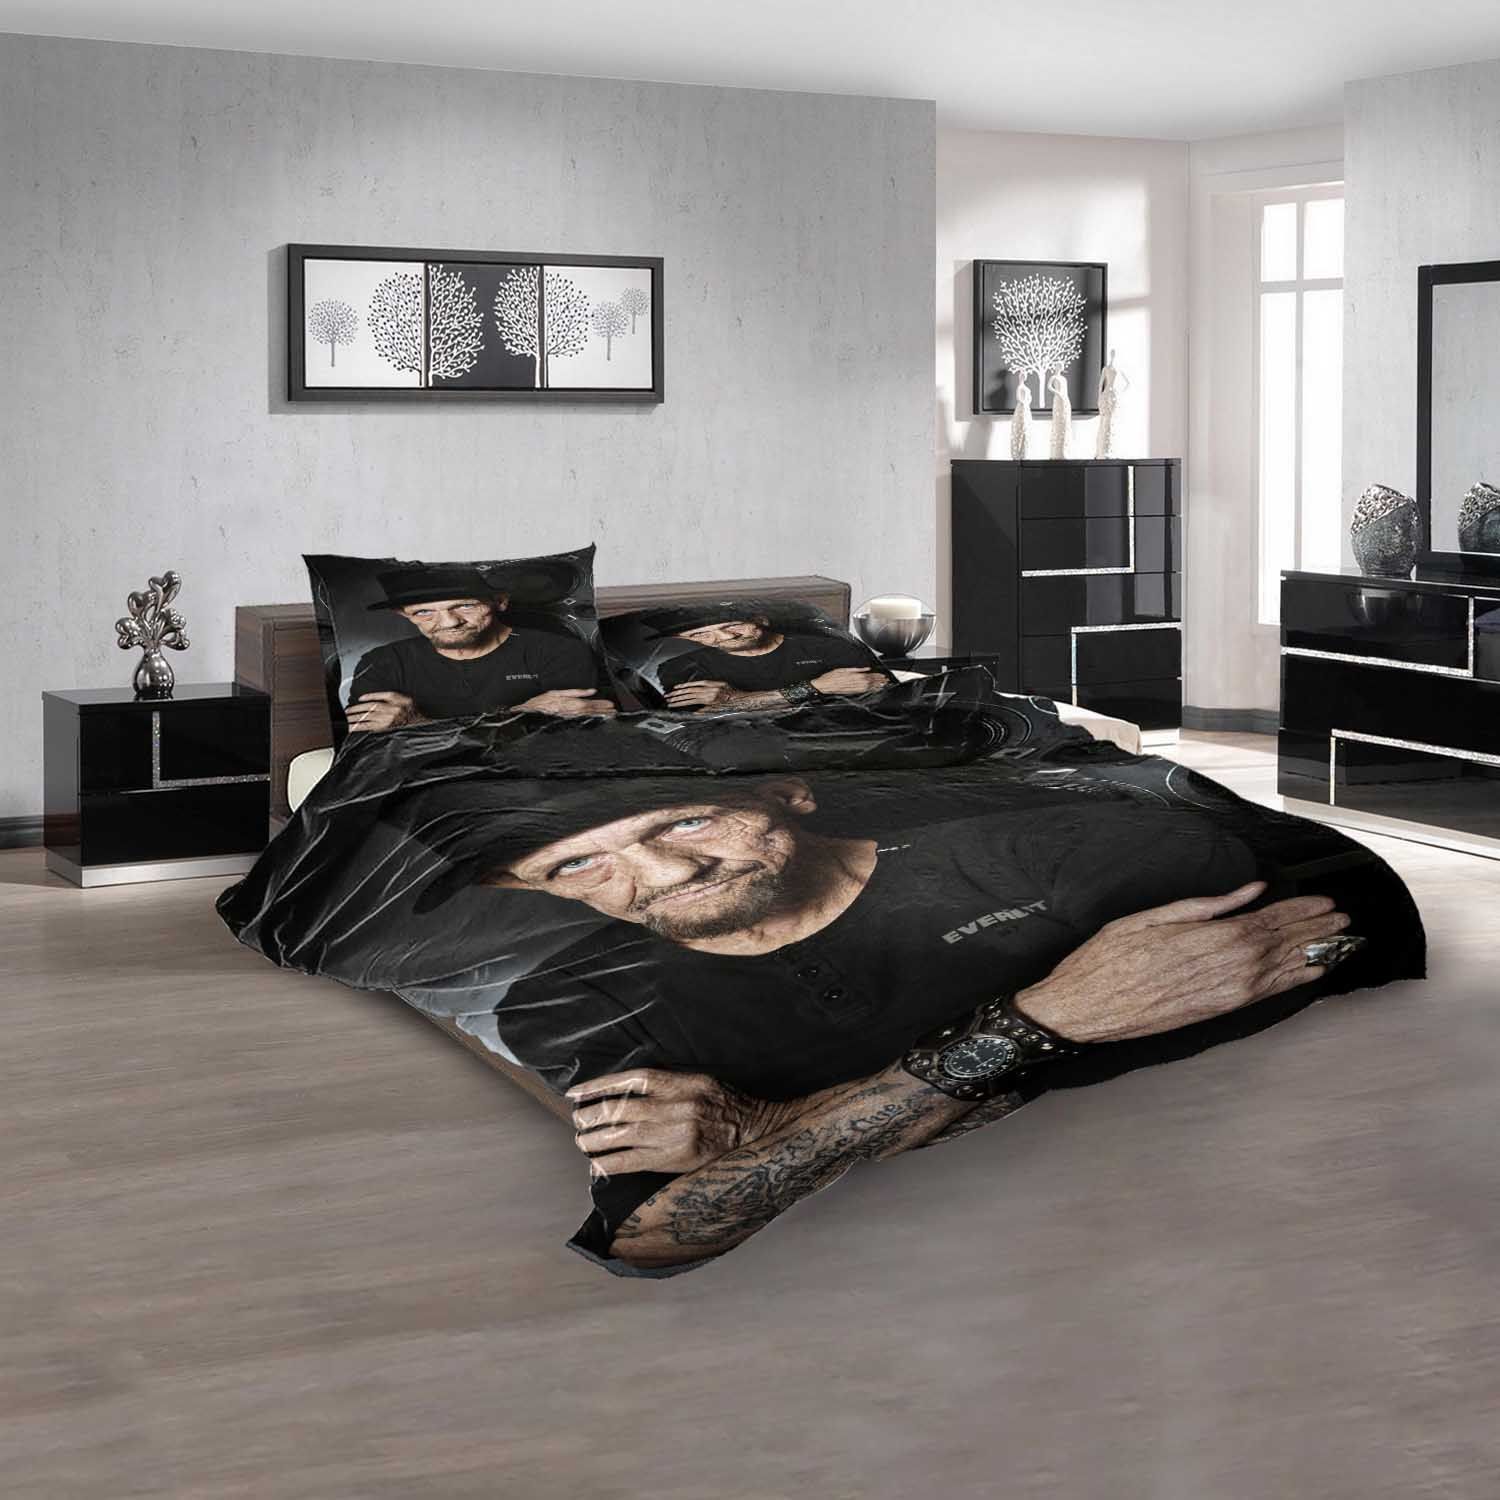 Famous Person Calvin Russell D Bedding Sets